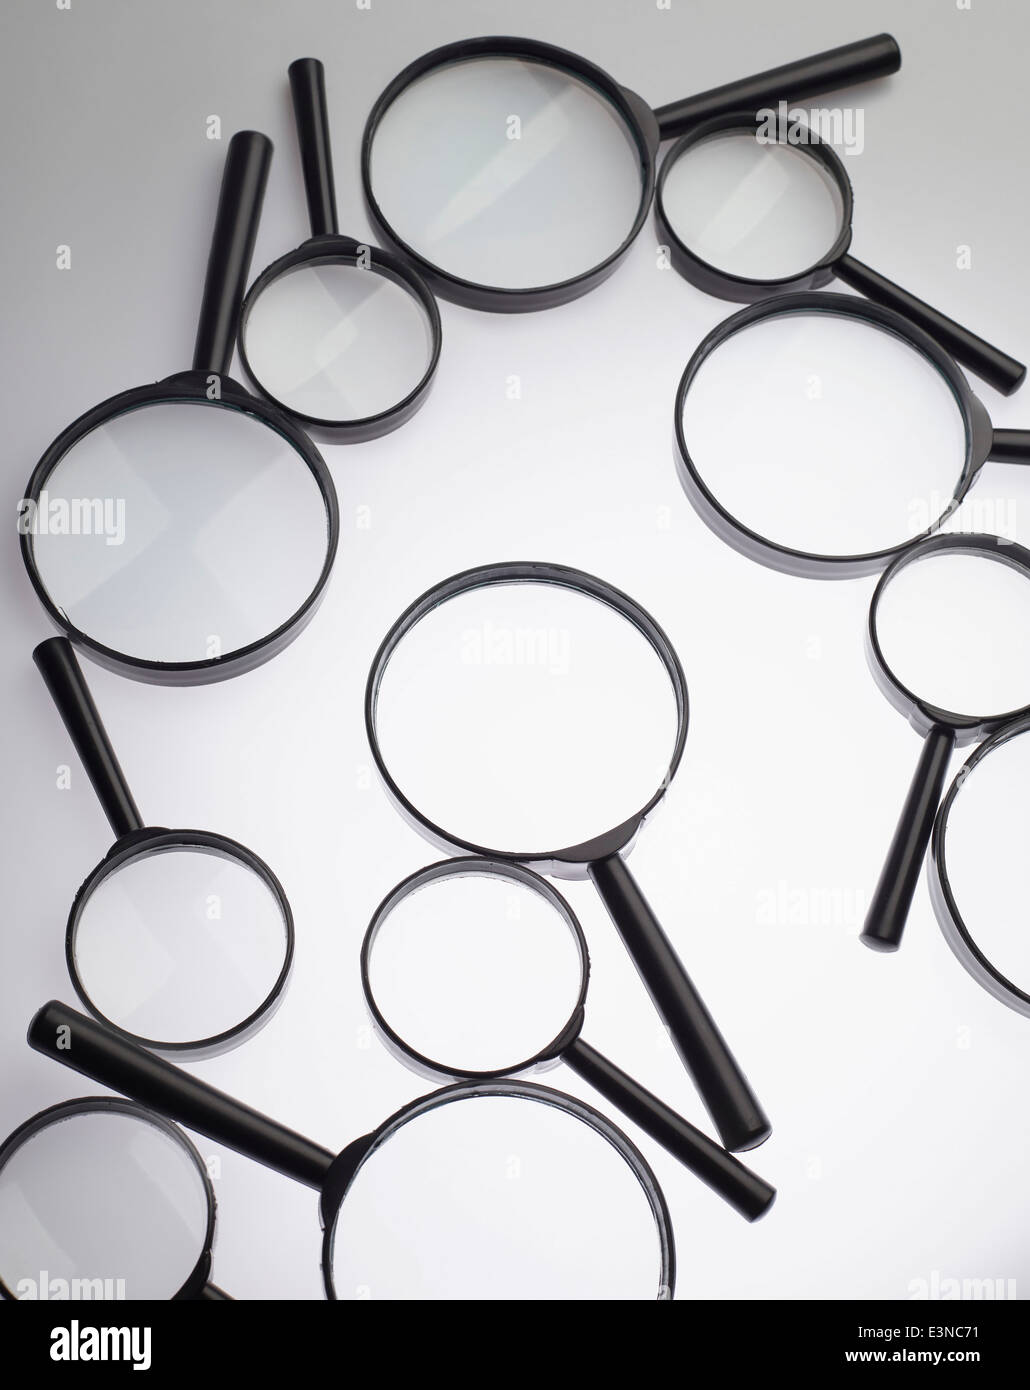 Magnifying glasses over white background Stock Photo